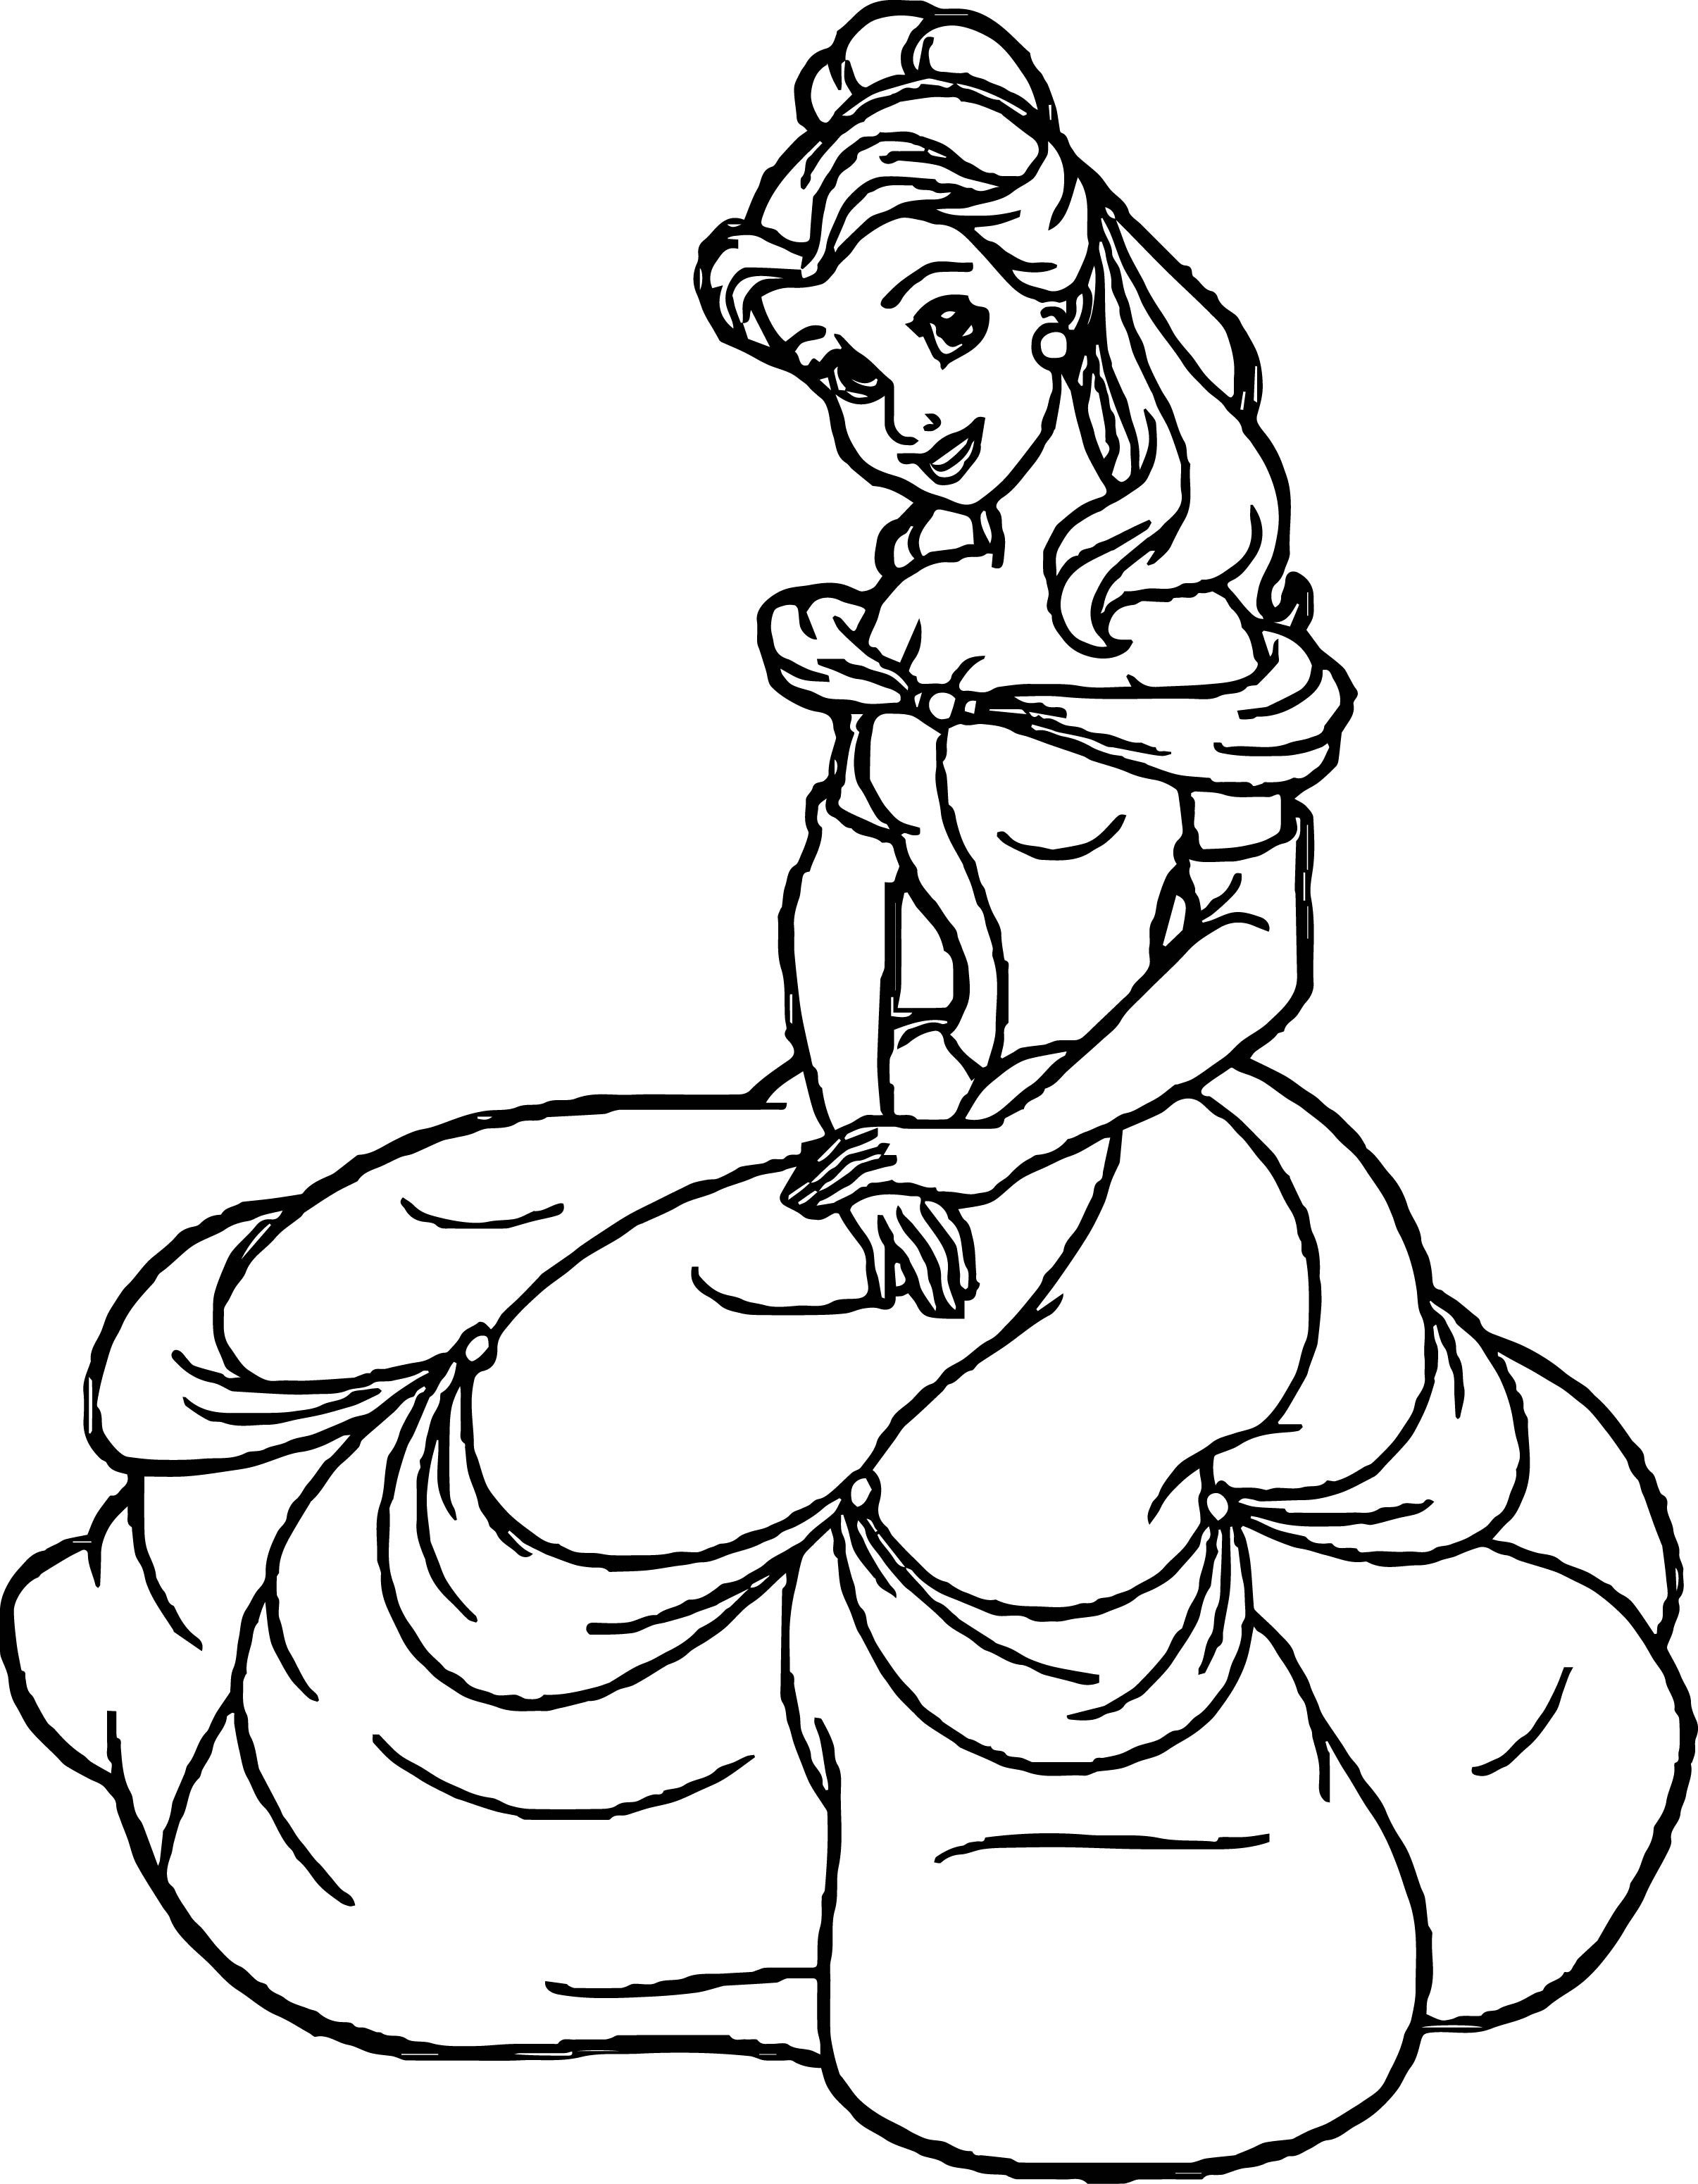 Princess Coloring Pages New Beautiful Easy Disney Princess Coloring Pages Download Lively Belle